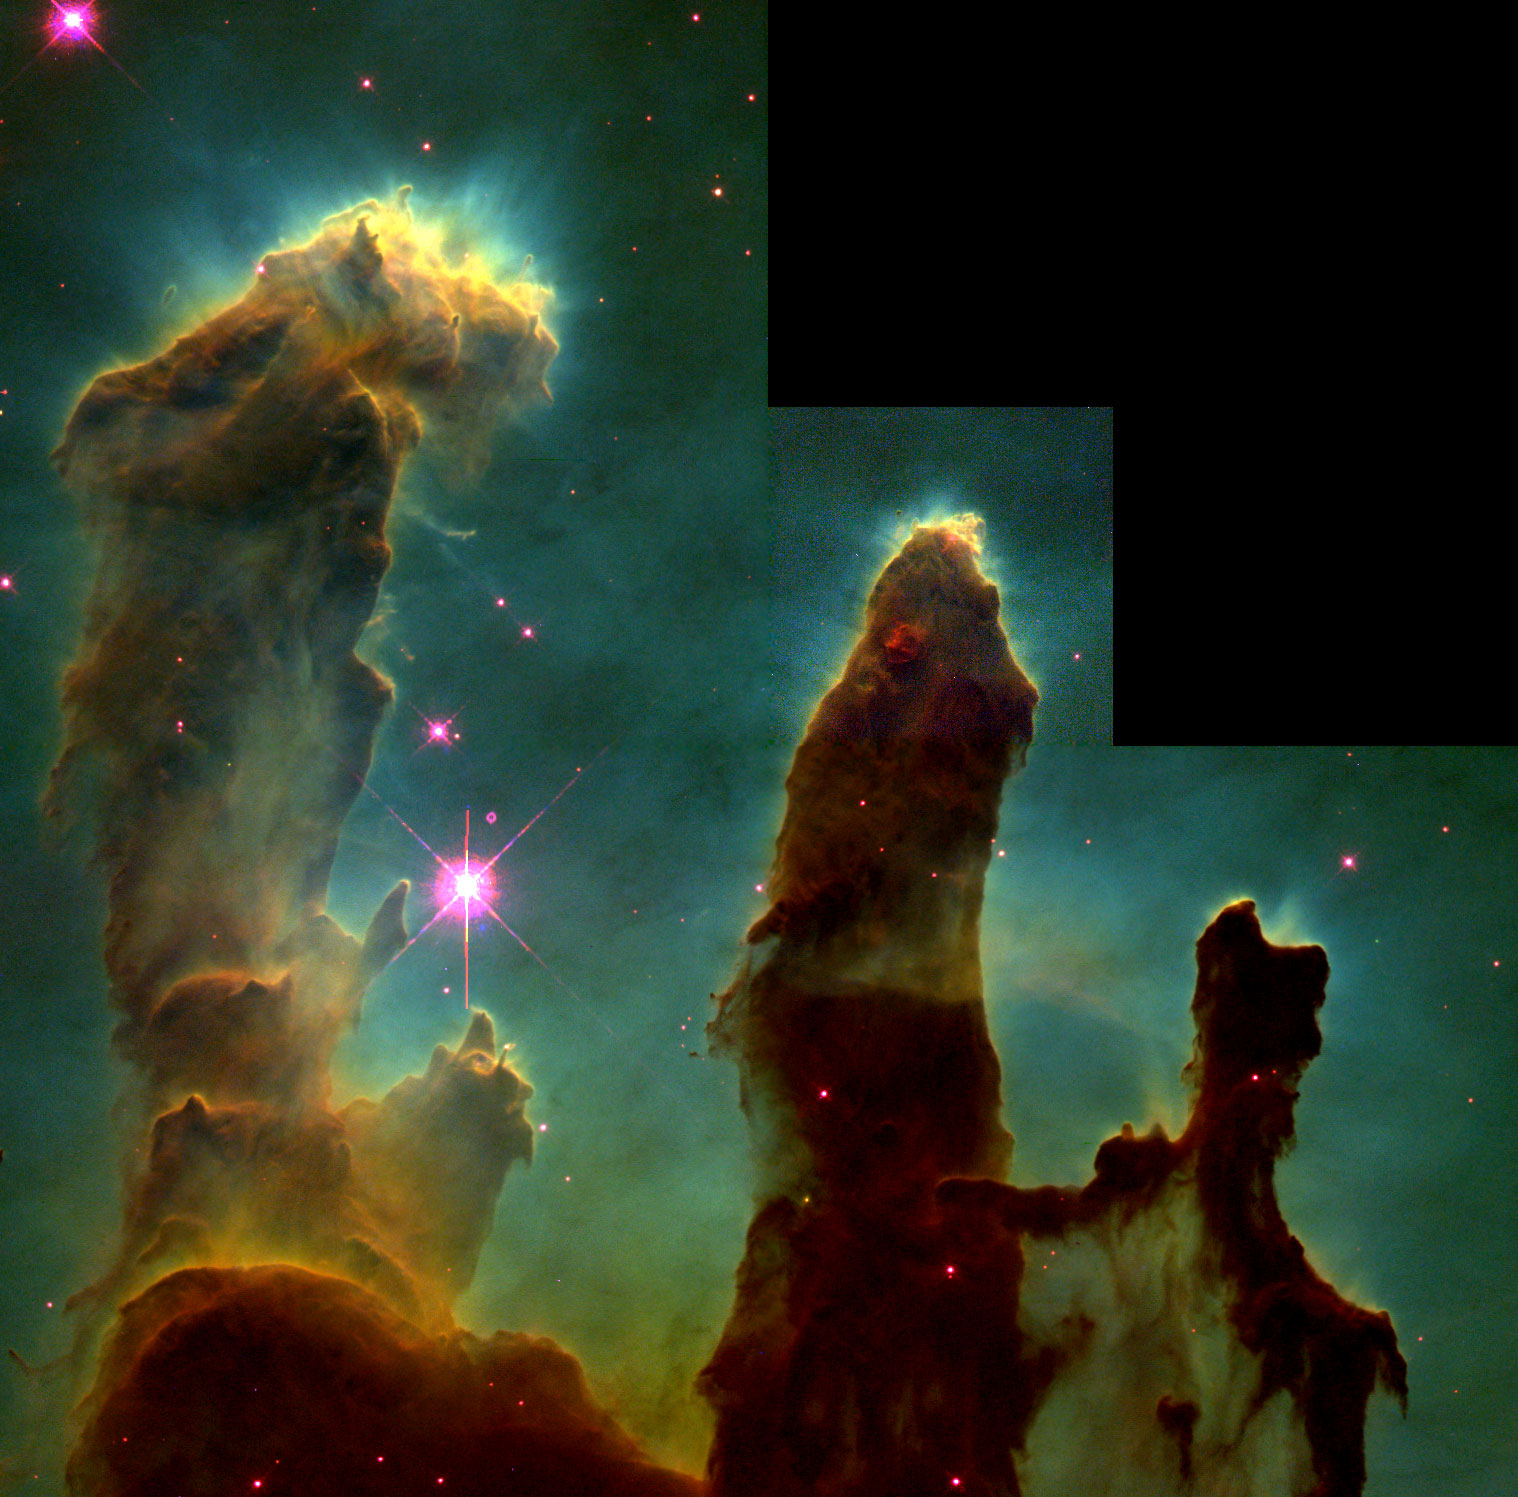 Inside the Eagle Nebula stand the Pillars of Creation portrayed in the Hubble Palette as captured by the Hubble Space Telescope. Credit: NASA/ESA/STScI/J. Hester and P. Scowen (Arizona State University)